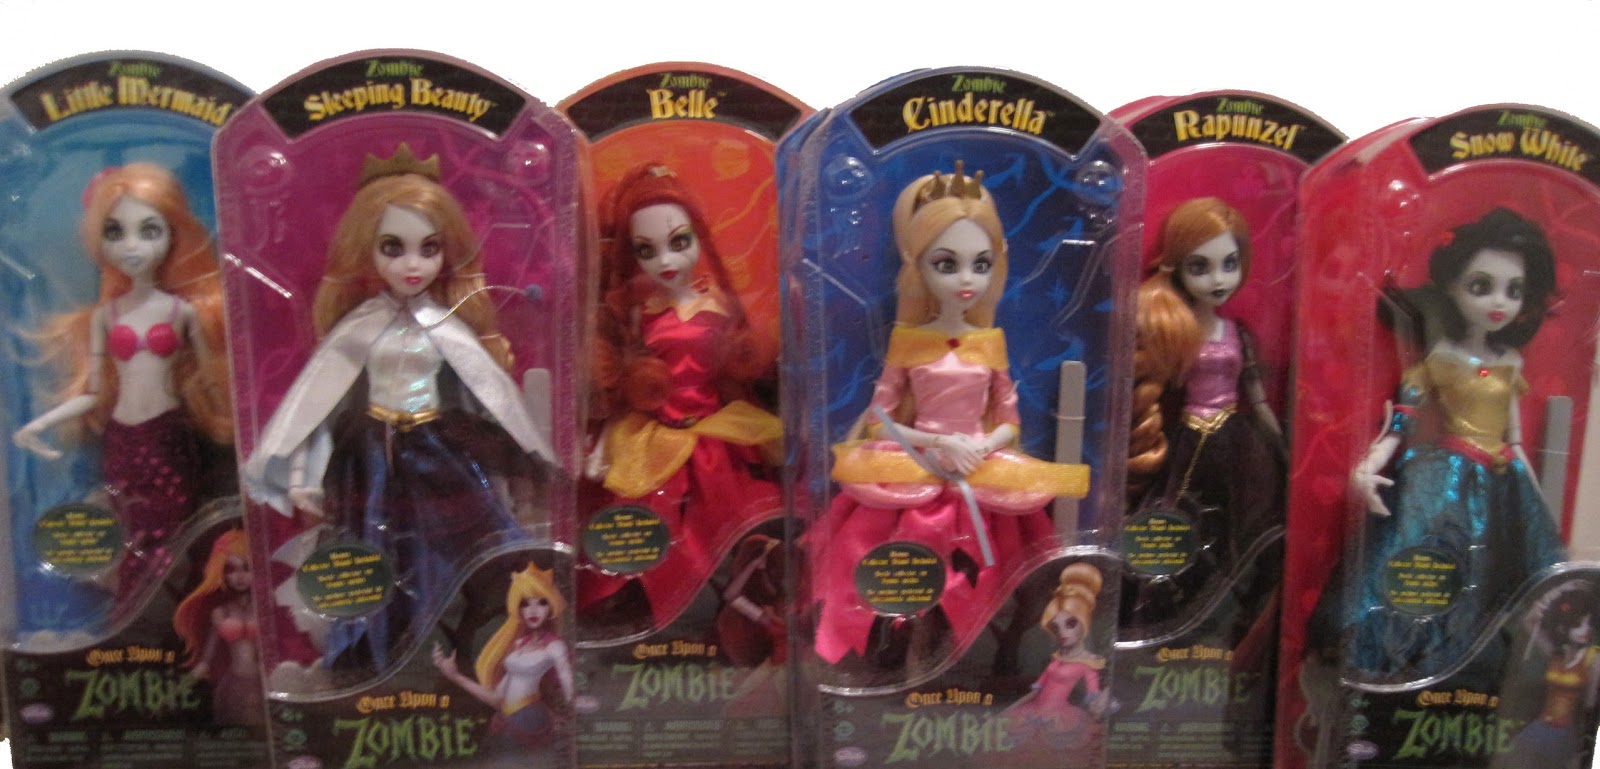 Toy Box Nebula Once Upon a Zombie Full Line Review!